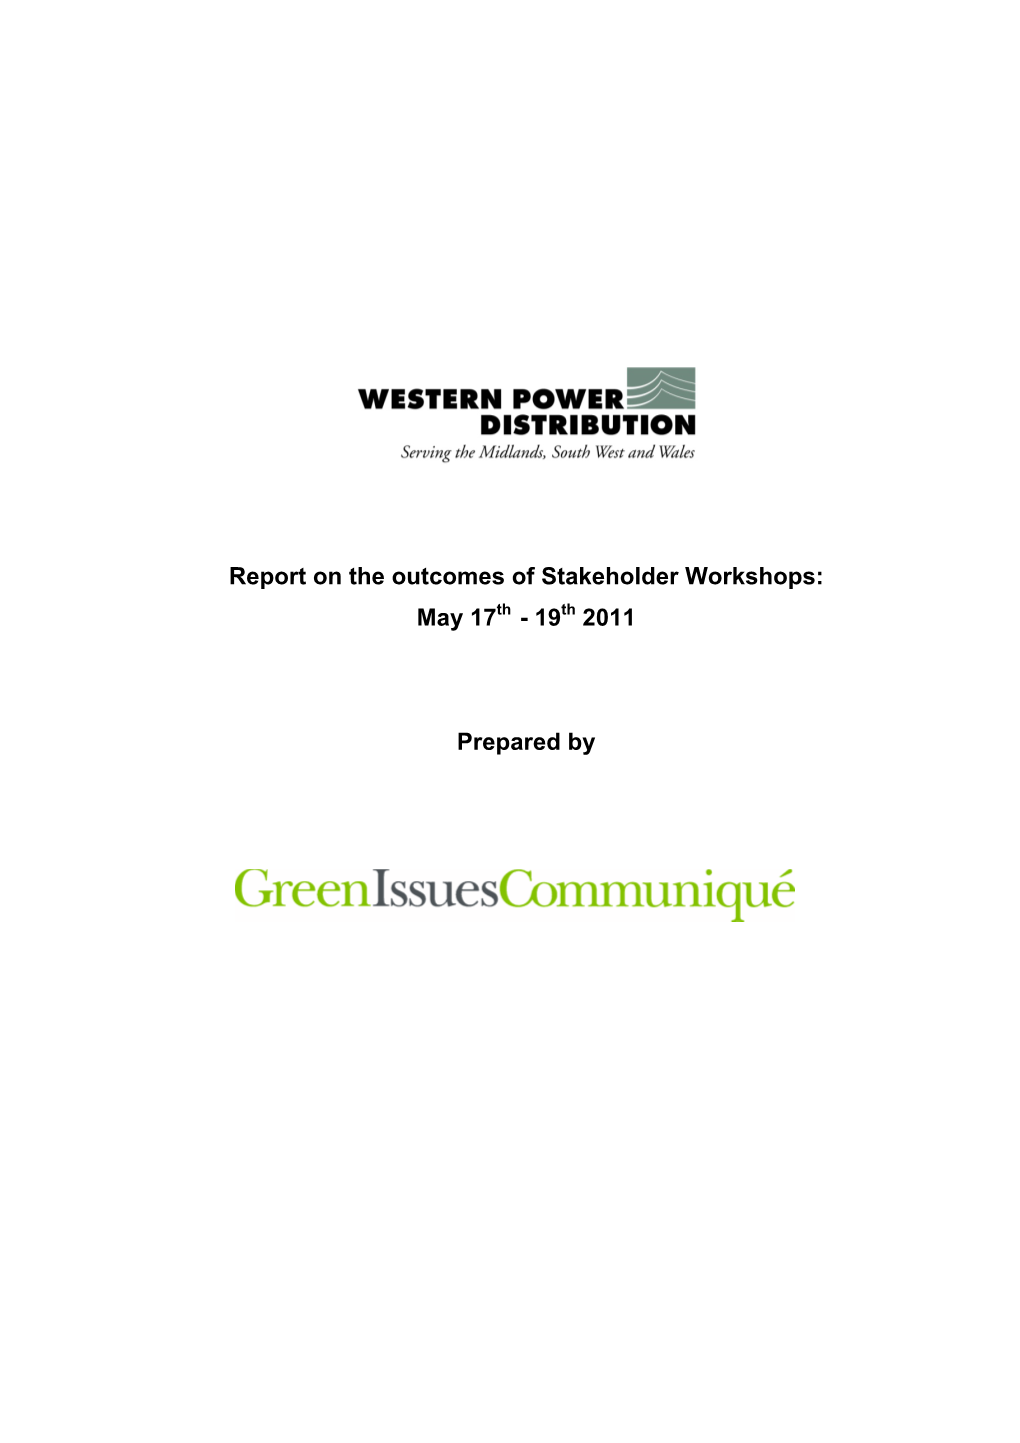 Report on the Outcomes of Stakeholder Workshops: May 17Th - 19Th 2011